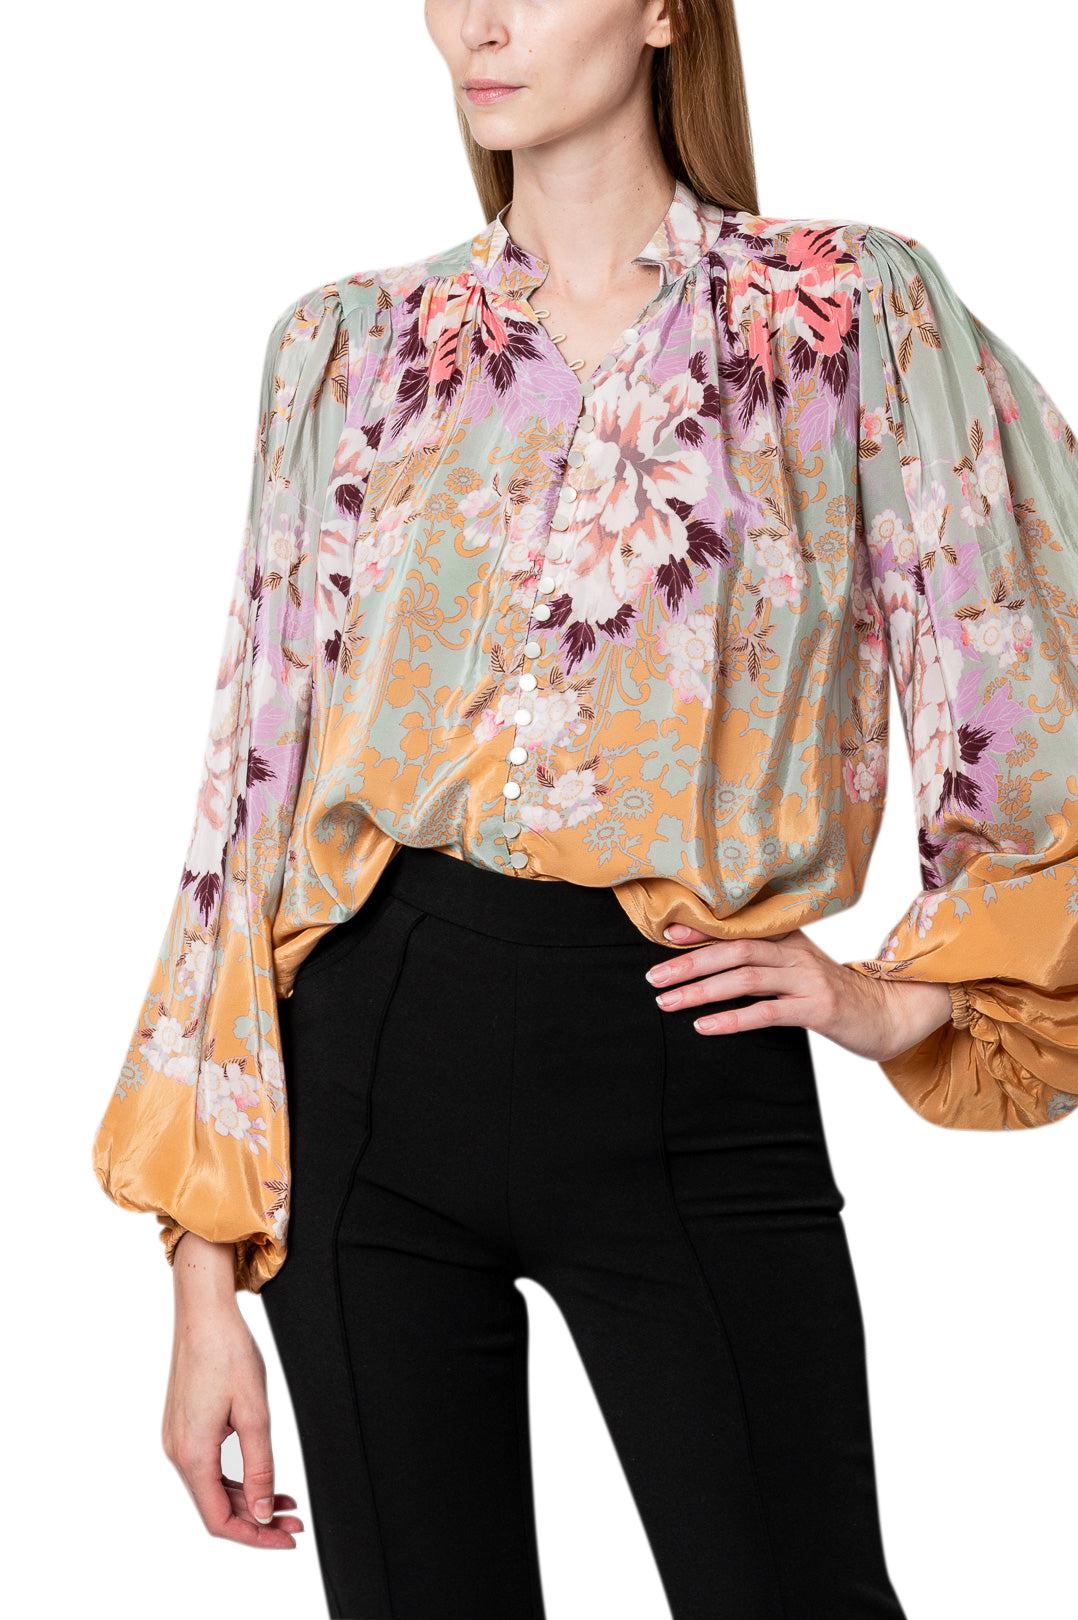 By Timo-Vintage flower print blouse-2340730-dgallerystore